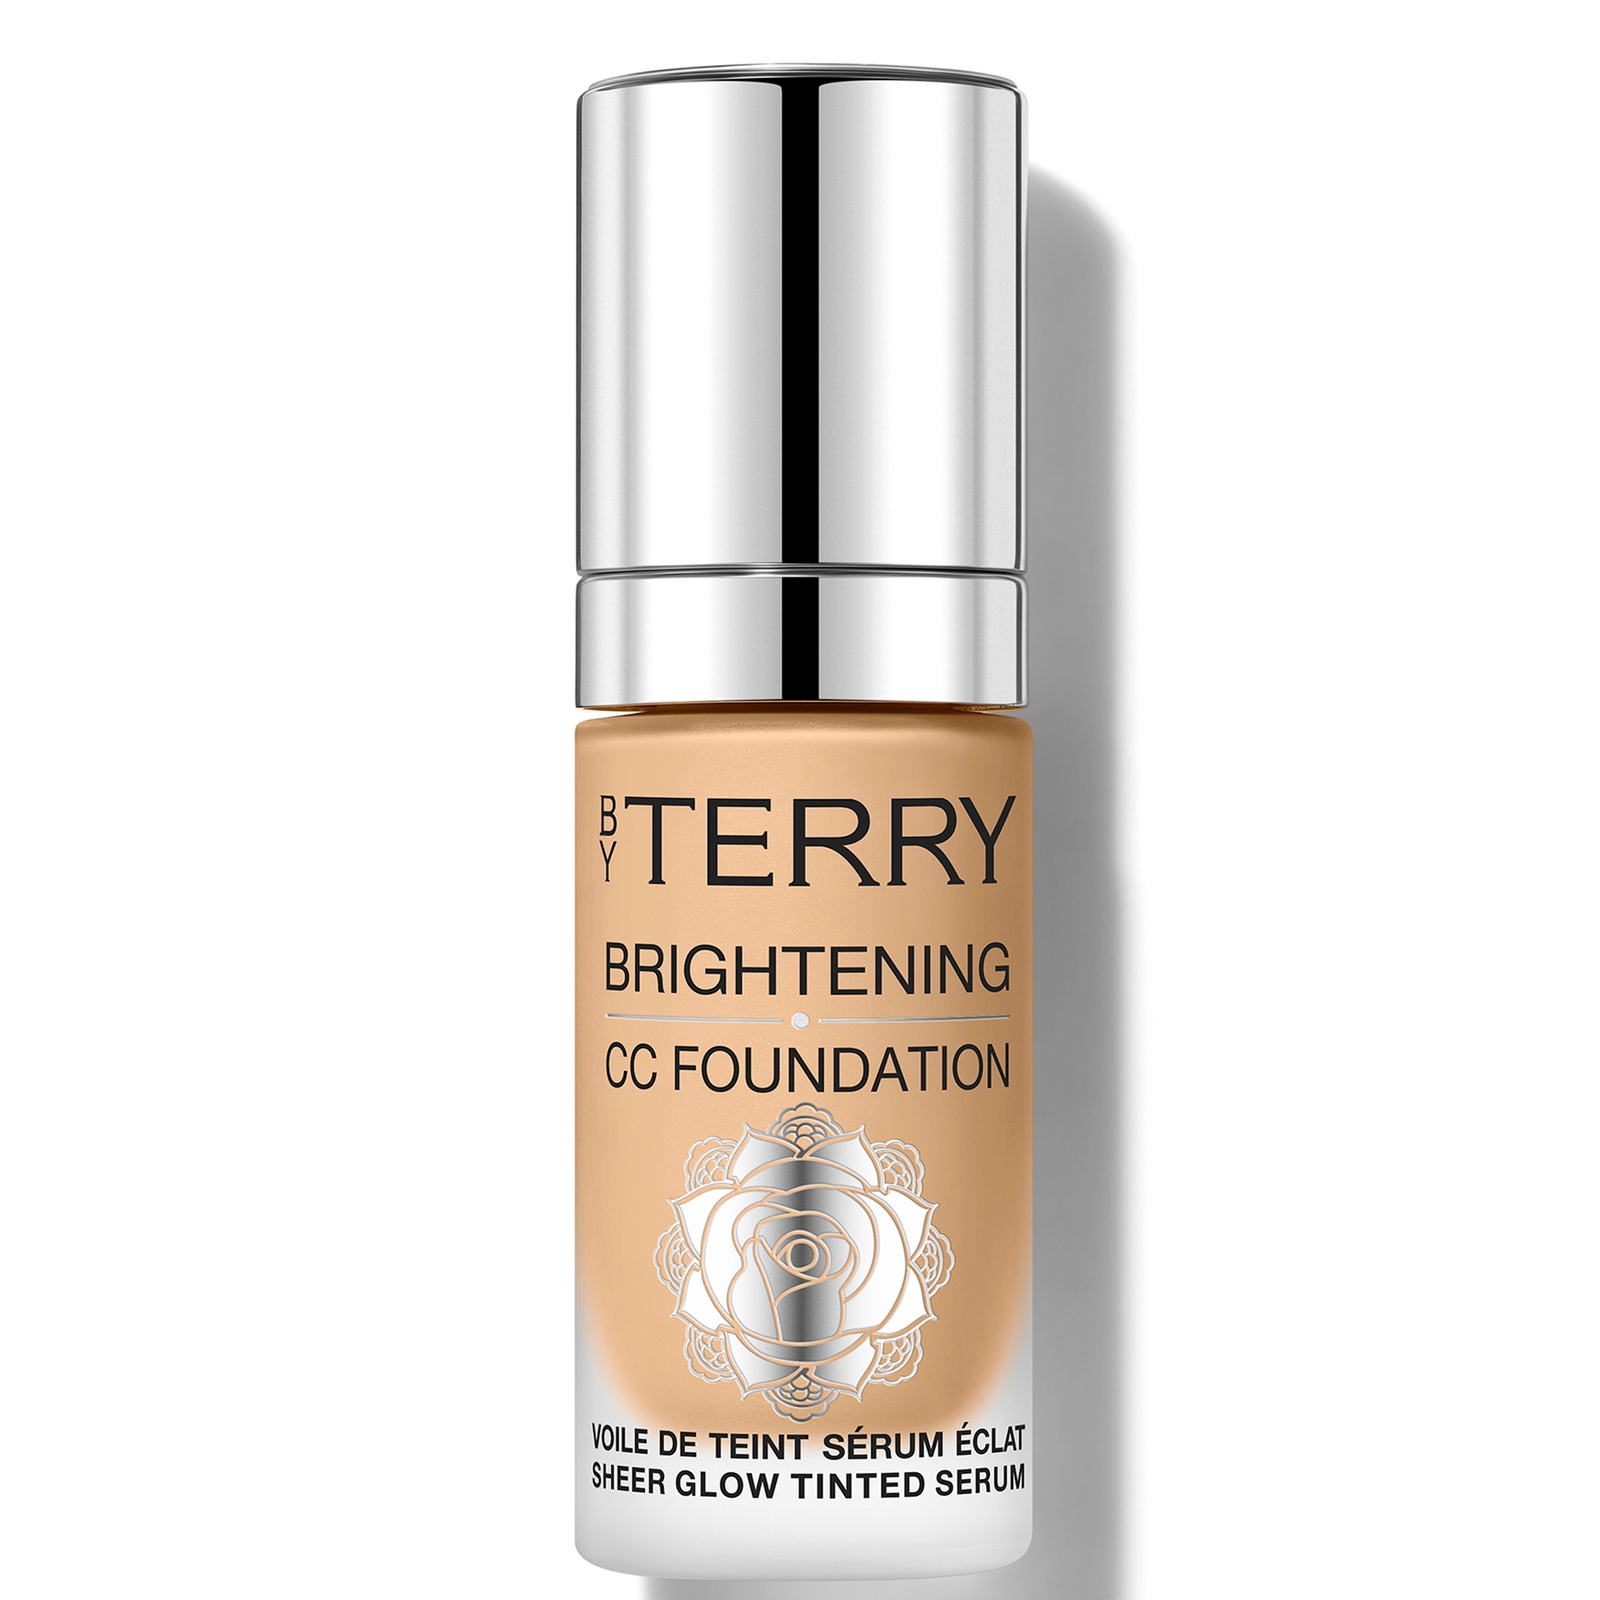 By Terry Brightening Cc Foundation 30ml (various Shades) - 5w In Neutral